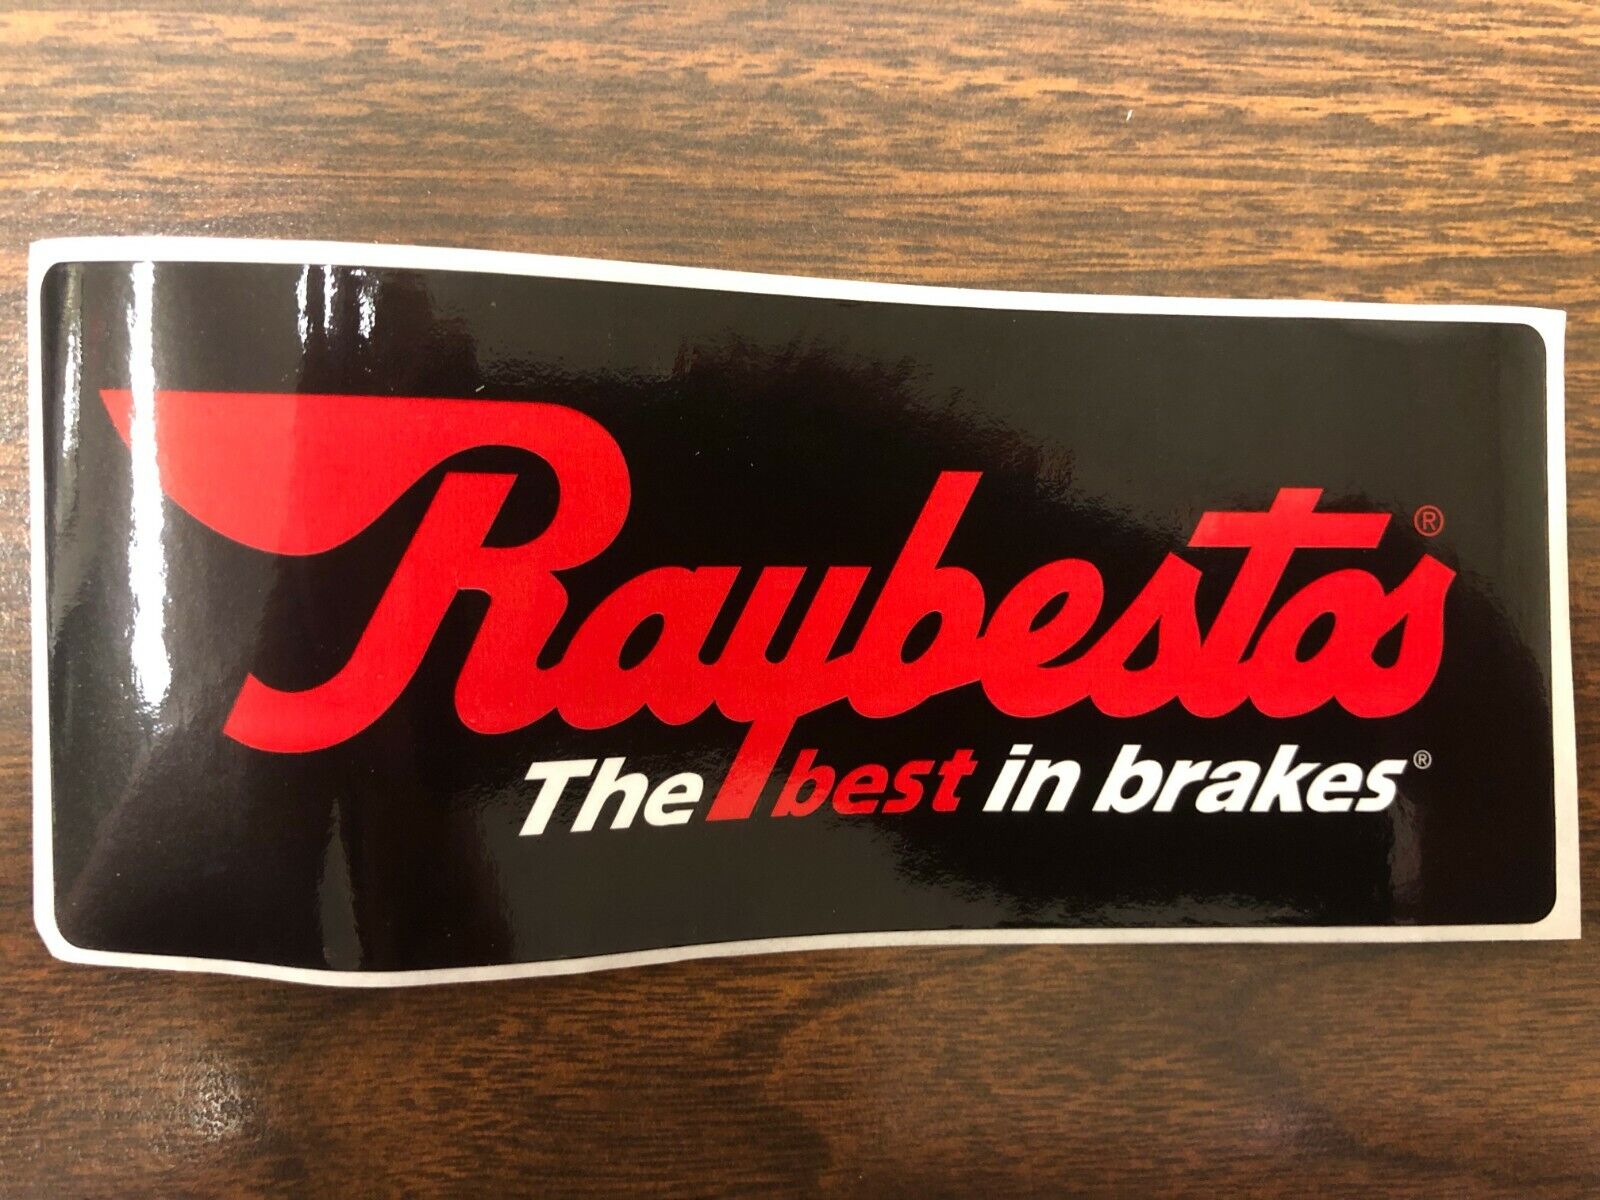 Raybestos The Best In Brakes racing sticker decal